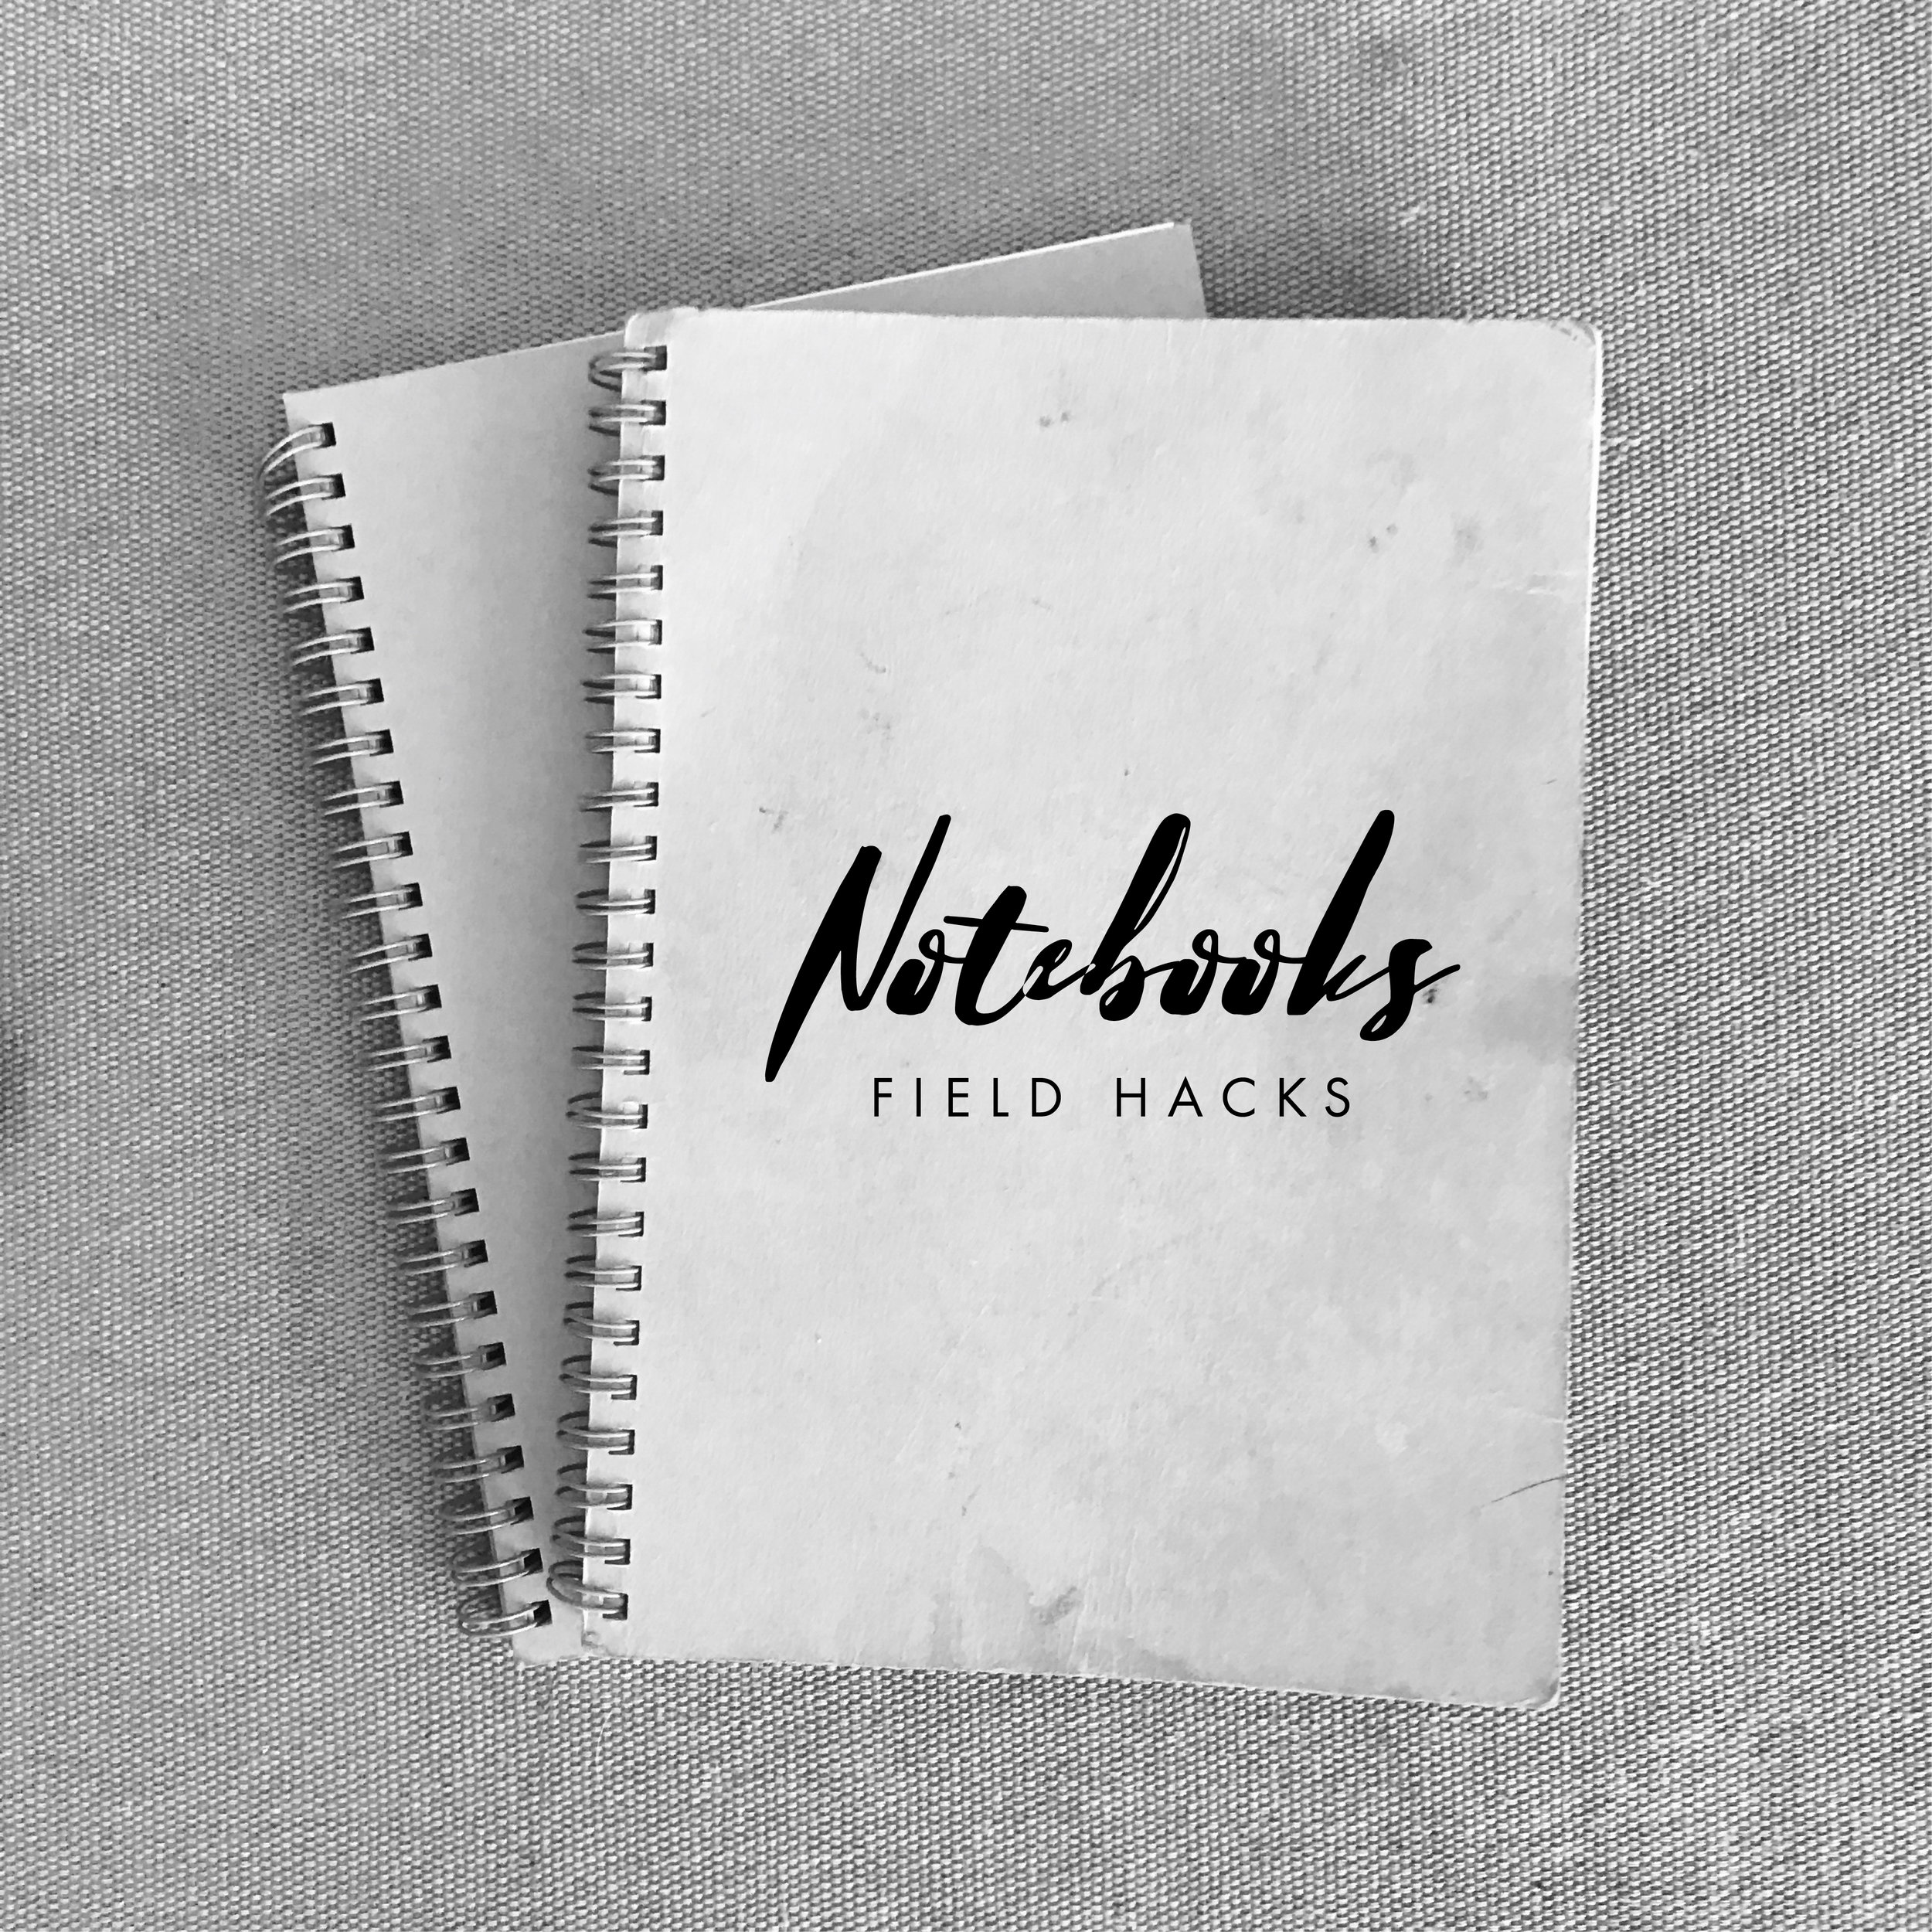  Bring a  notebook  to jot down... well notes as you go. And a pen -- preferably the non-exploding on airplanes kind. We love these notebooks by Muji. The spiral binding with the cardboard covers make it easy to fold over in the field and write when 